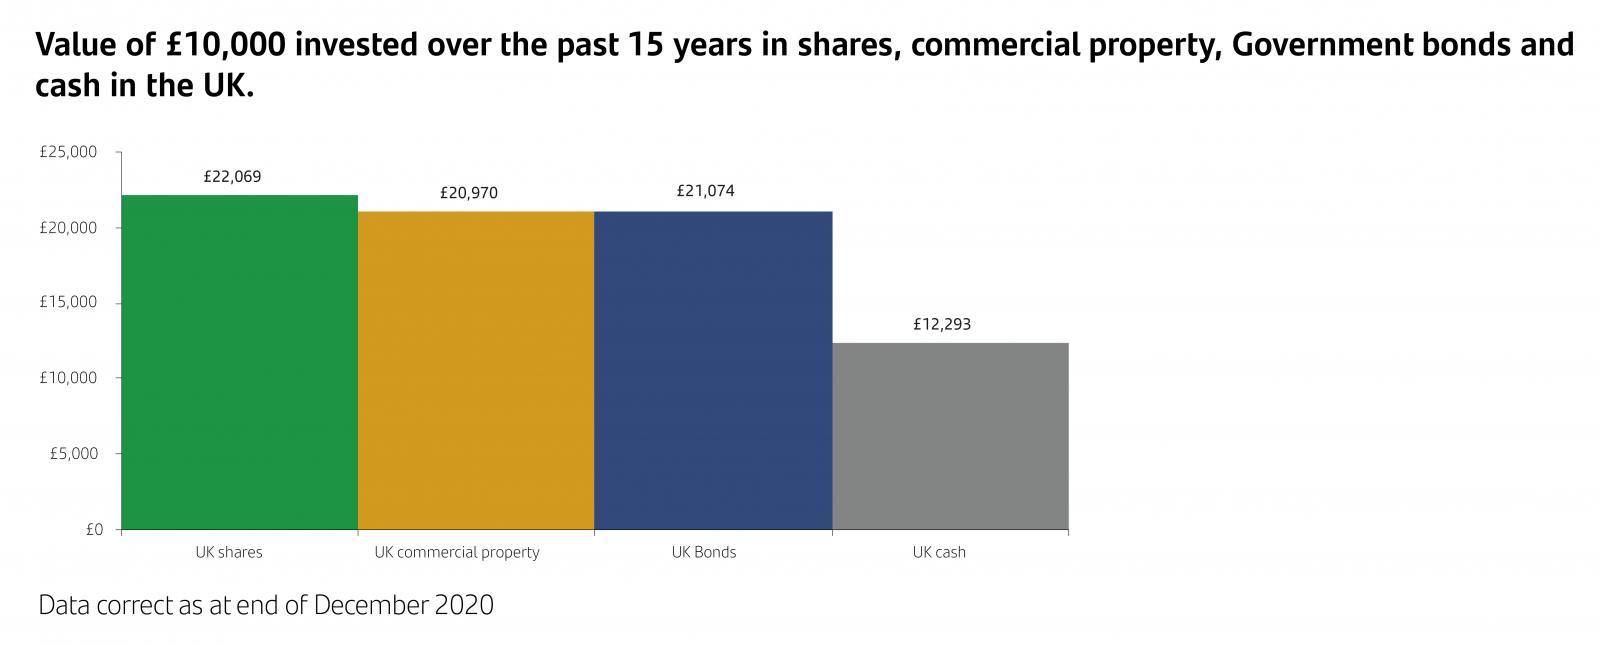 Value of £10,000 invested over the past 15 years in shares, commercial property, Government bonds and cash in the UK. 